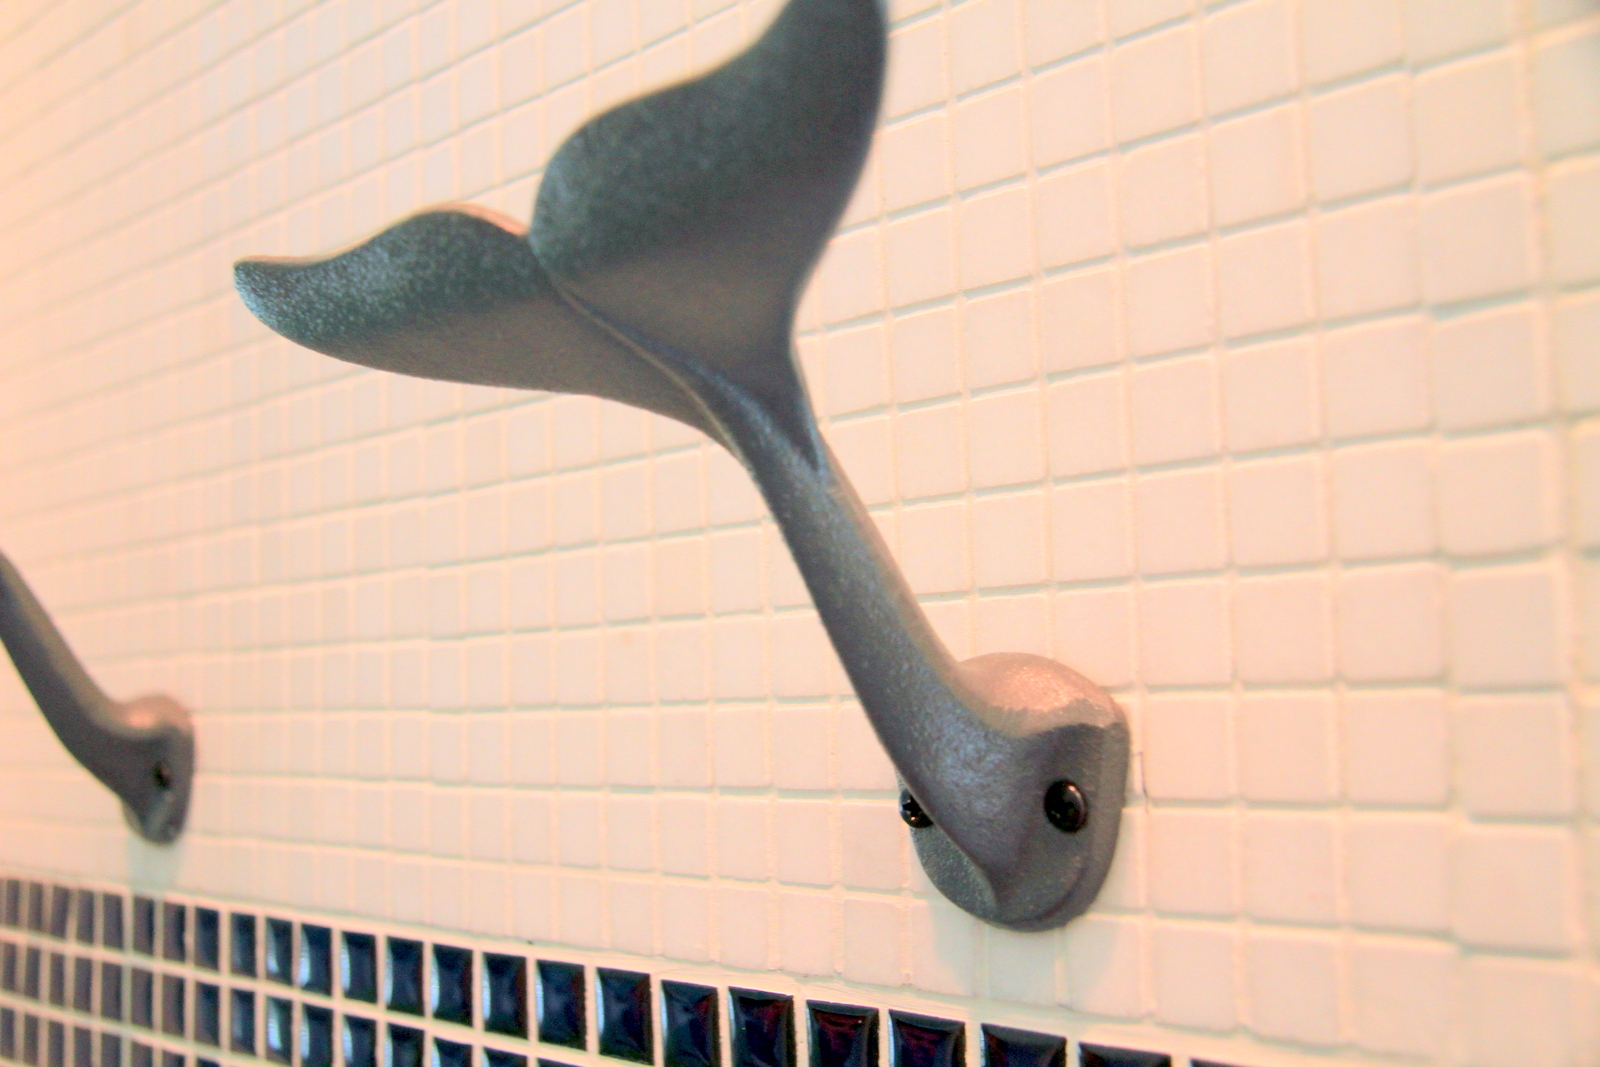 A whale towel hanger is beautifully placed to accent our Coastal bathrooms.